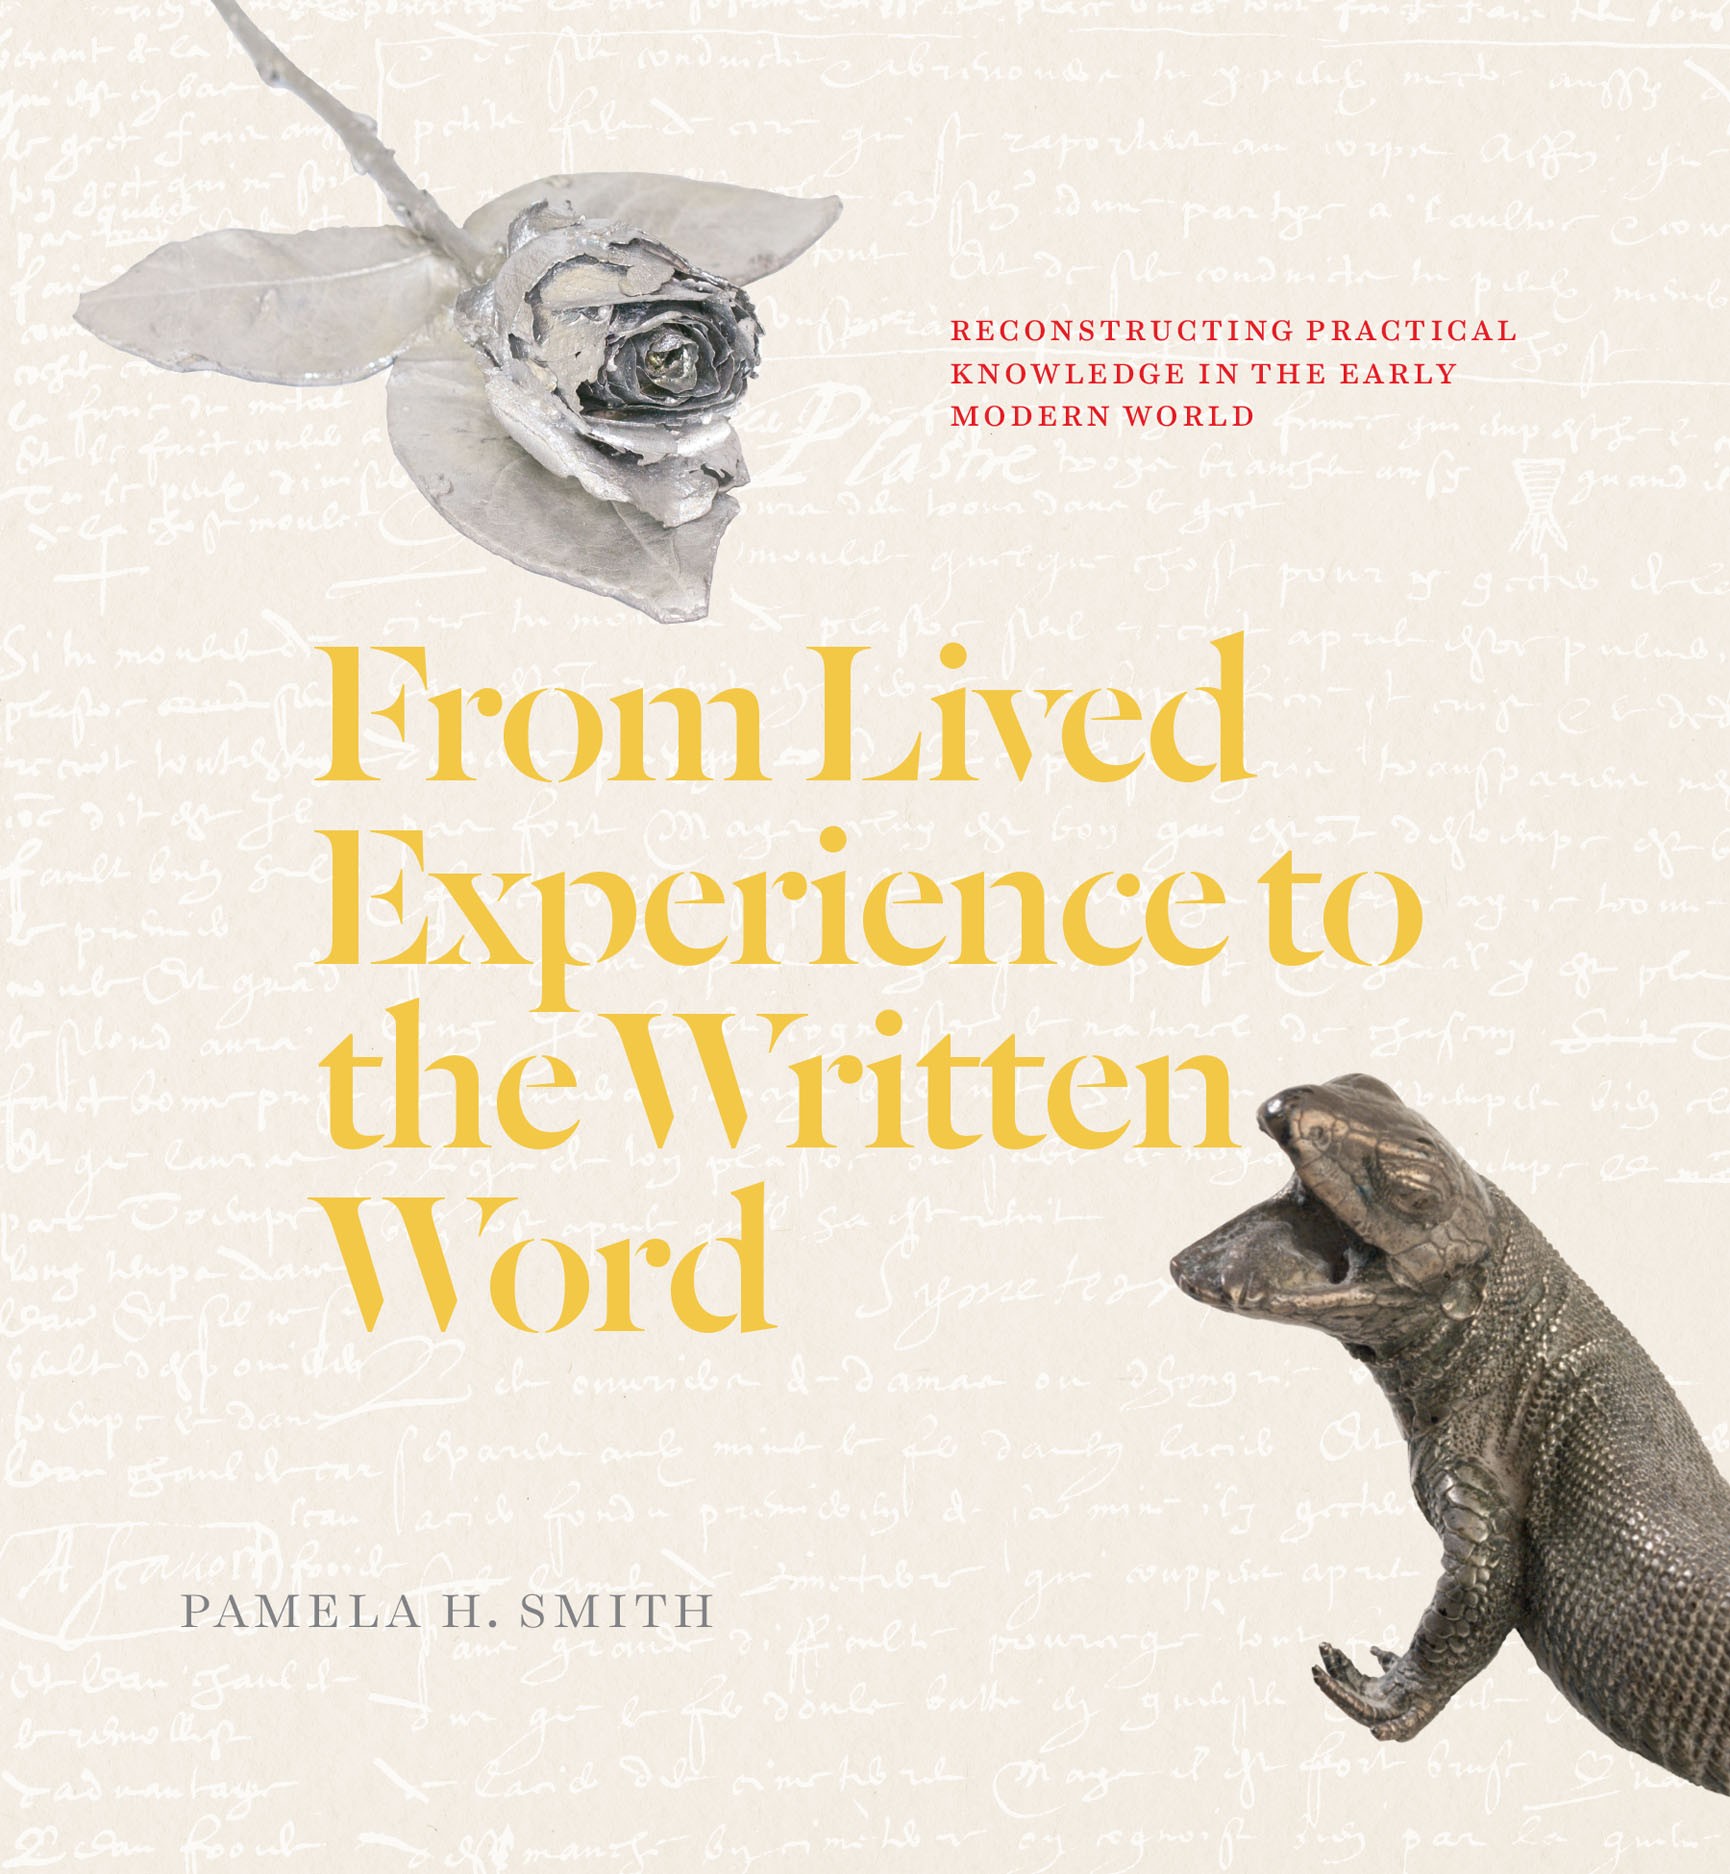 Book cover "From Lived Experience to the Written Word: Reconstructing Practical Knowledge in the Early Modern World"